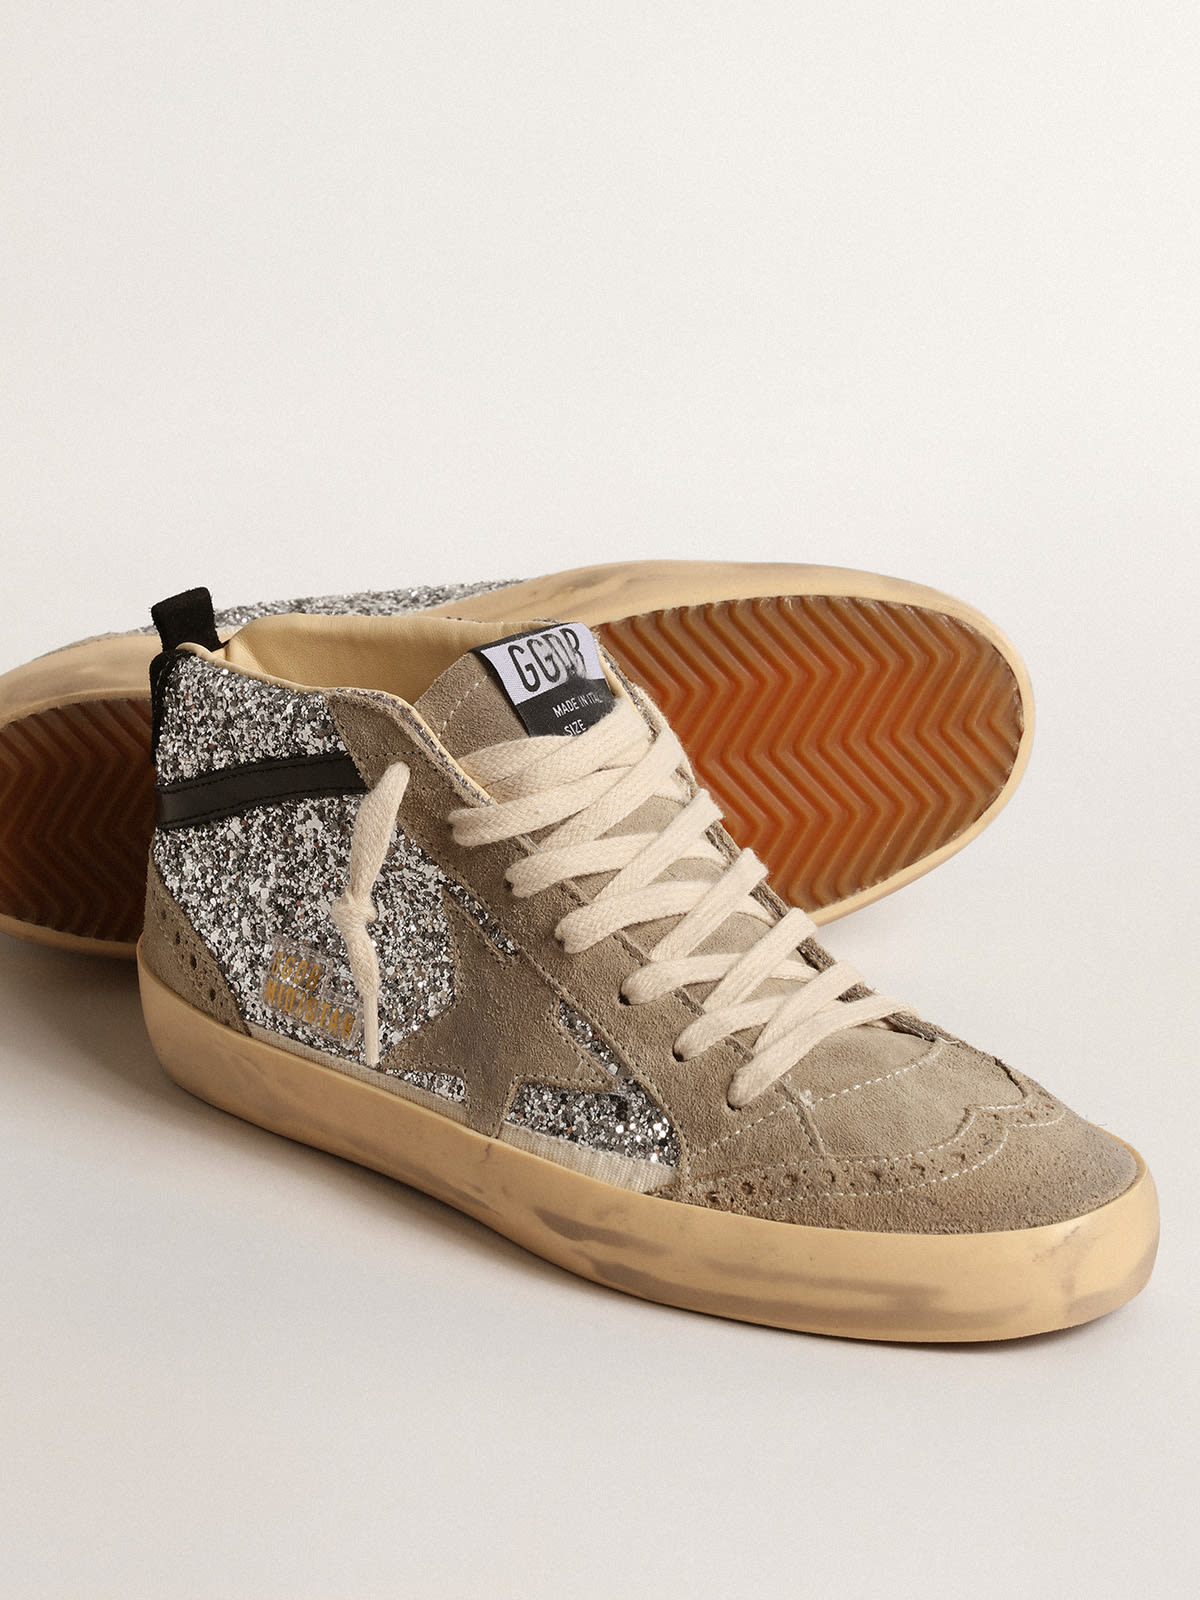 Golden Goose - Mid Star in silver glitter with suede star and black flash  in 